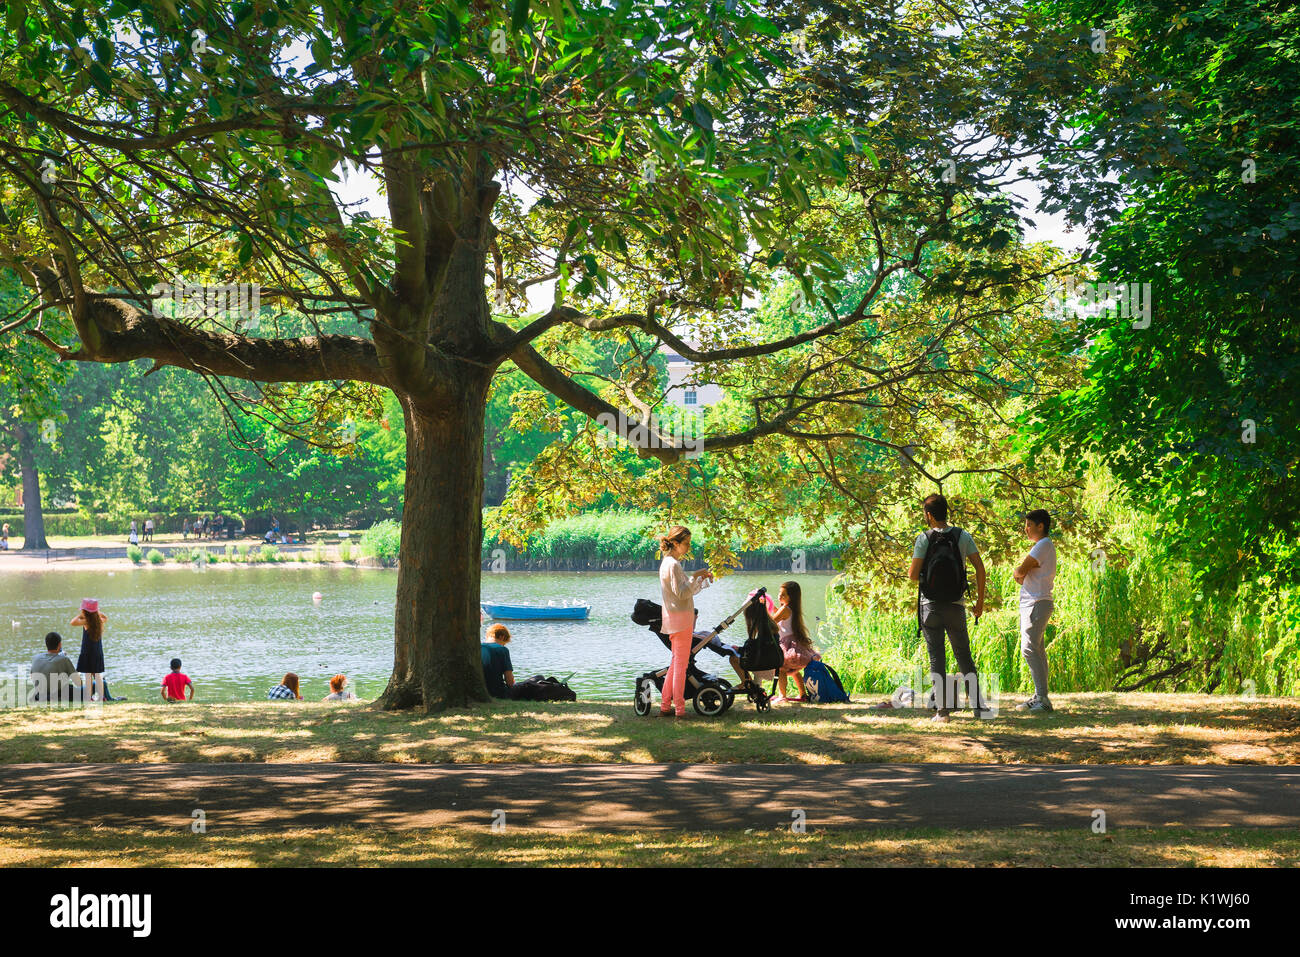 London park summer, on a summer afternoon tourists picnic beside the boating lake in Regent's Park, London, UK. Stock Photo